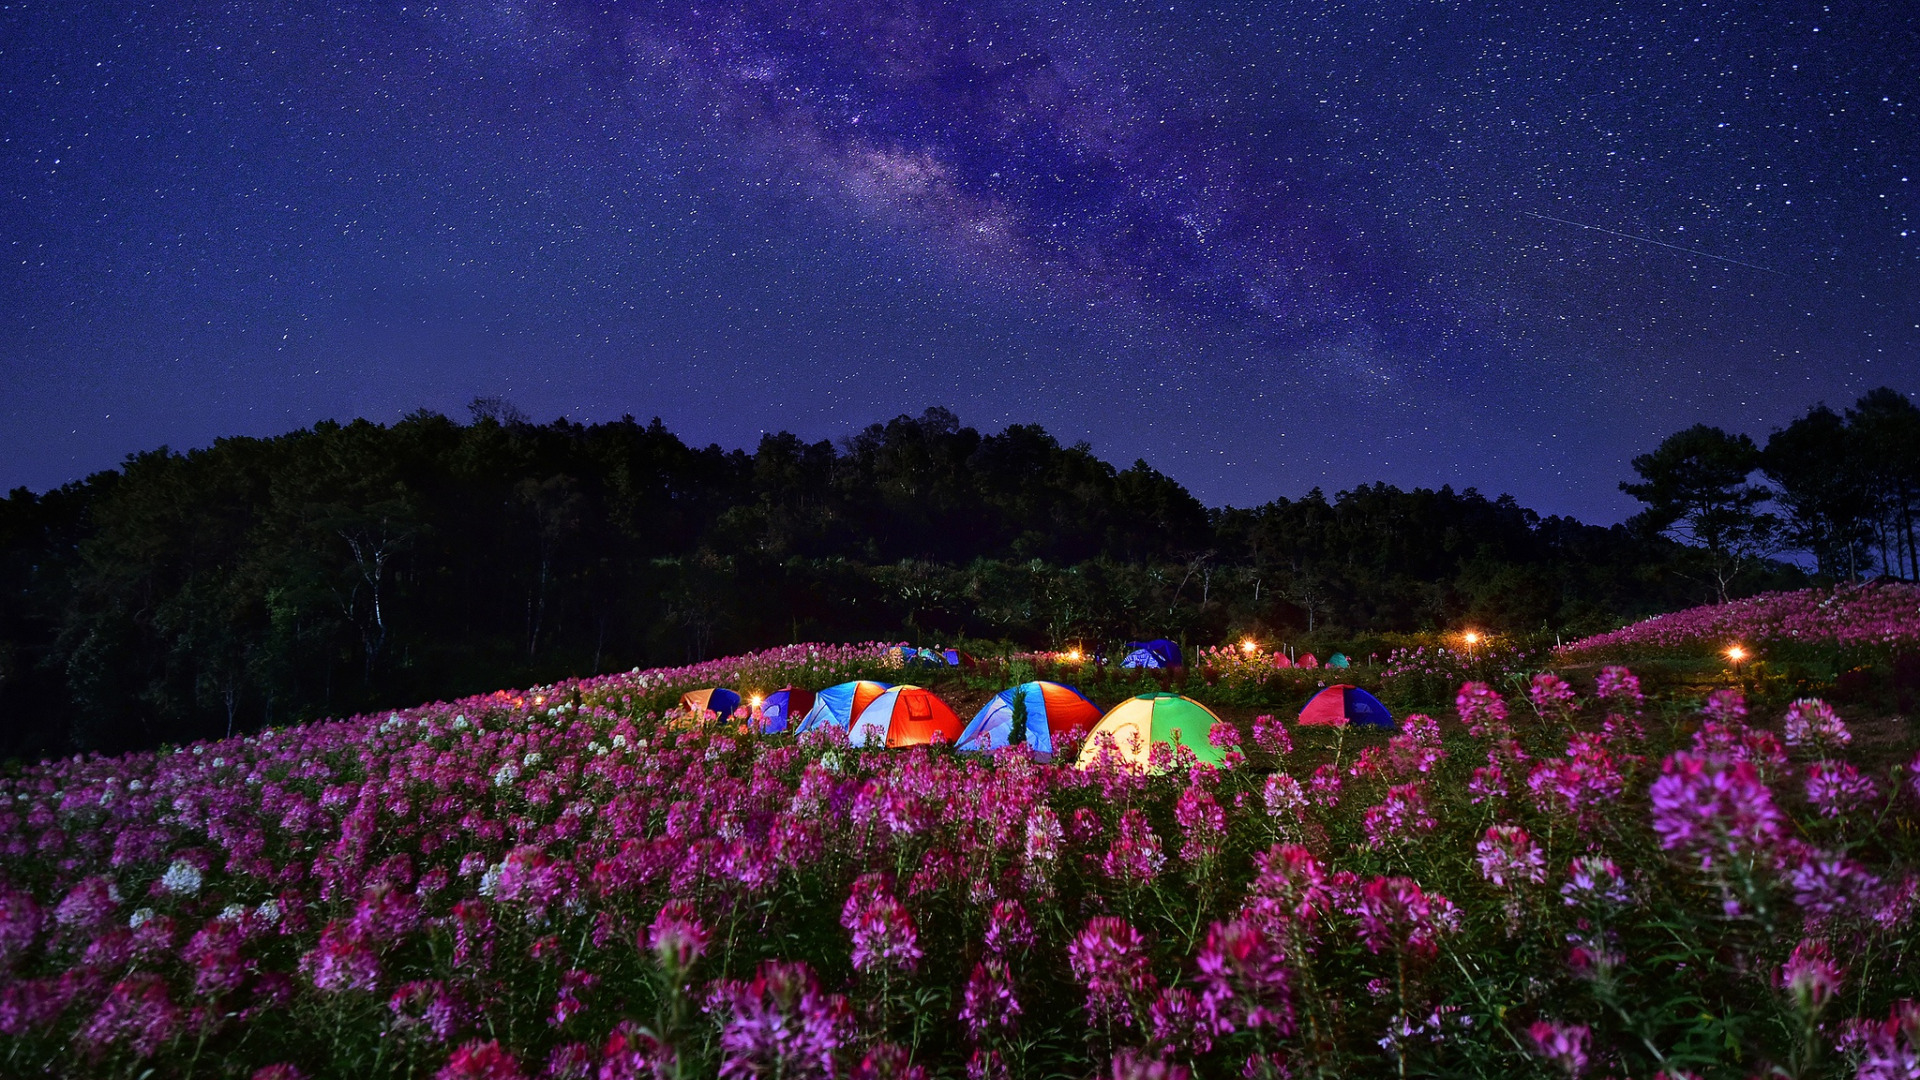 General 1920x1080 nature landscape night stars flowers field Milky Way trees forest tent